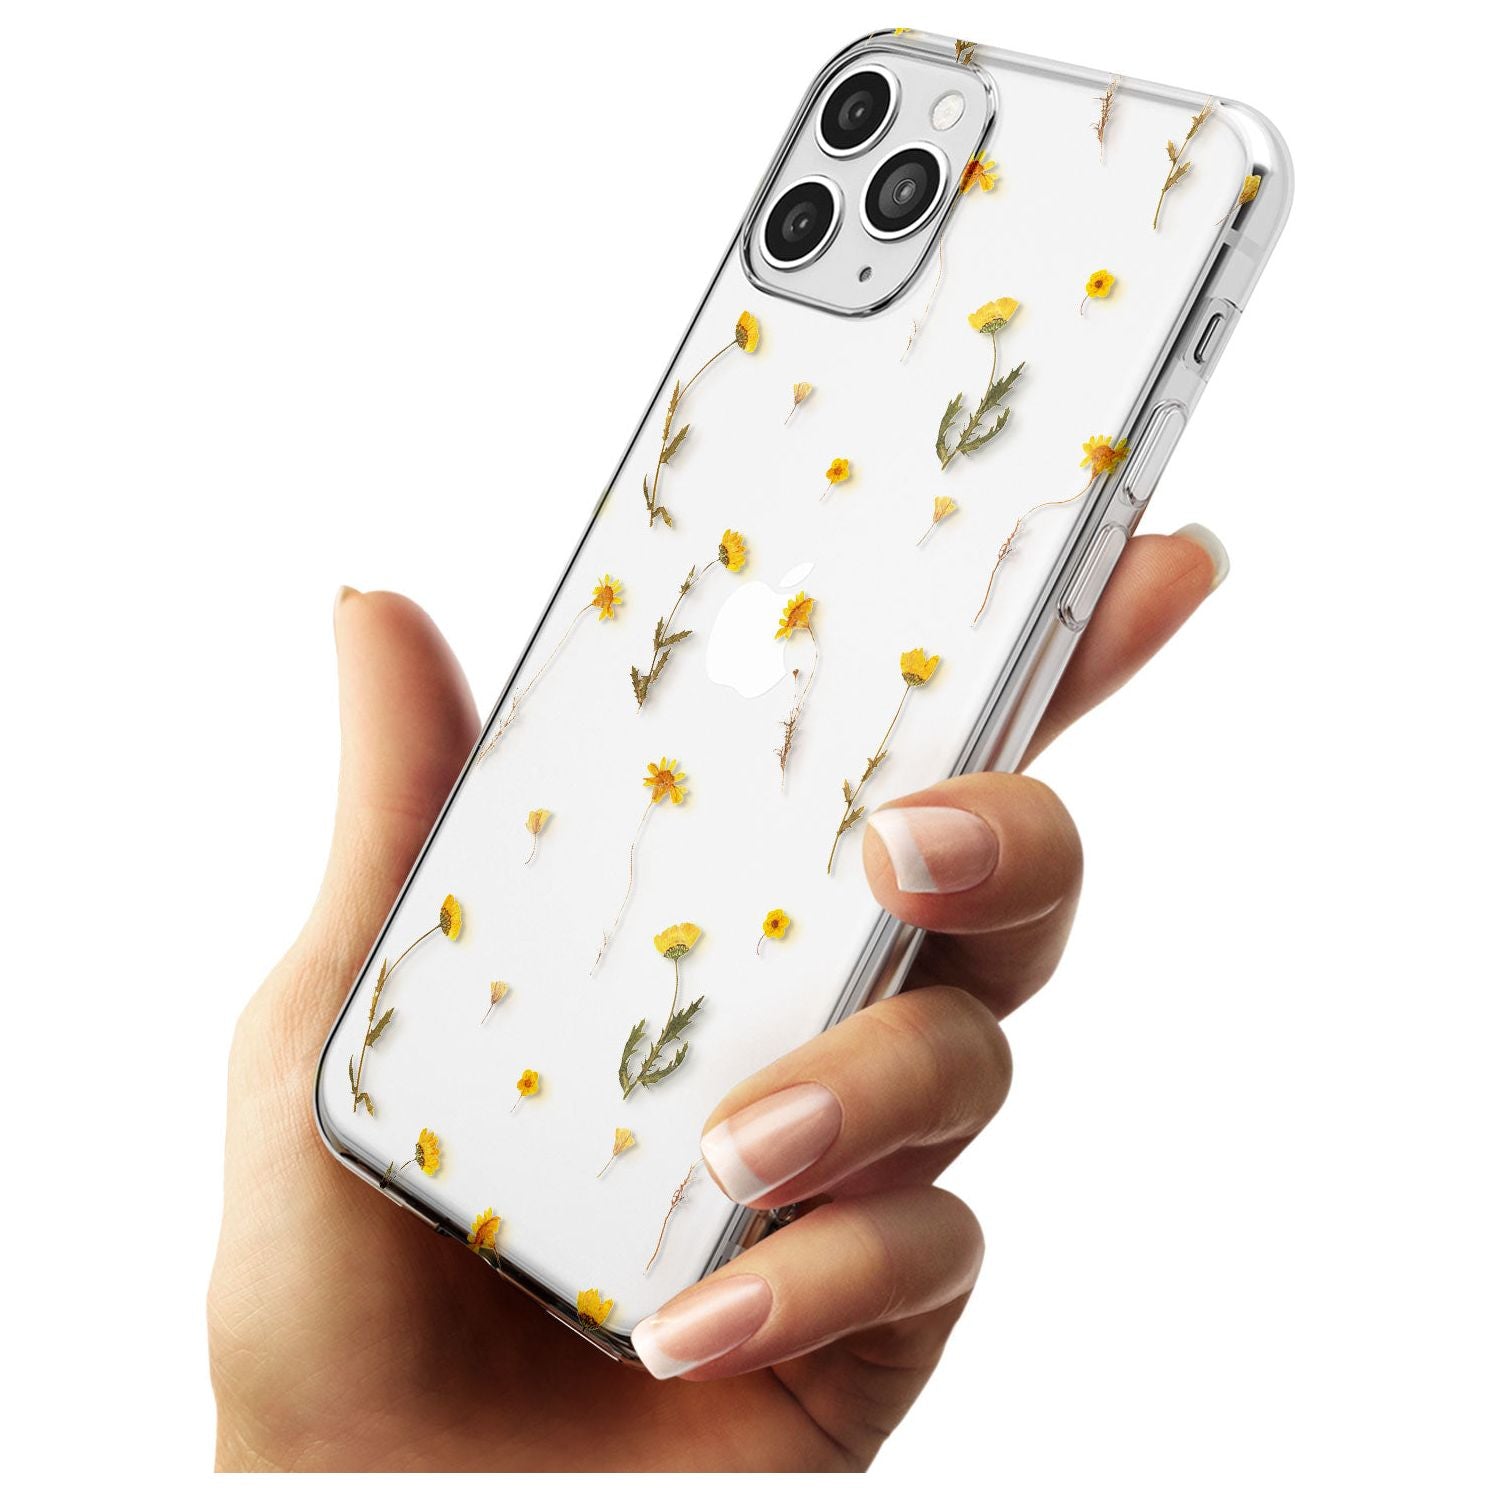 Mixed Yellow Flowers - Dried Flower-Inspired Slim TPU Phone Case for iPhone 11 Pro Max